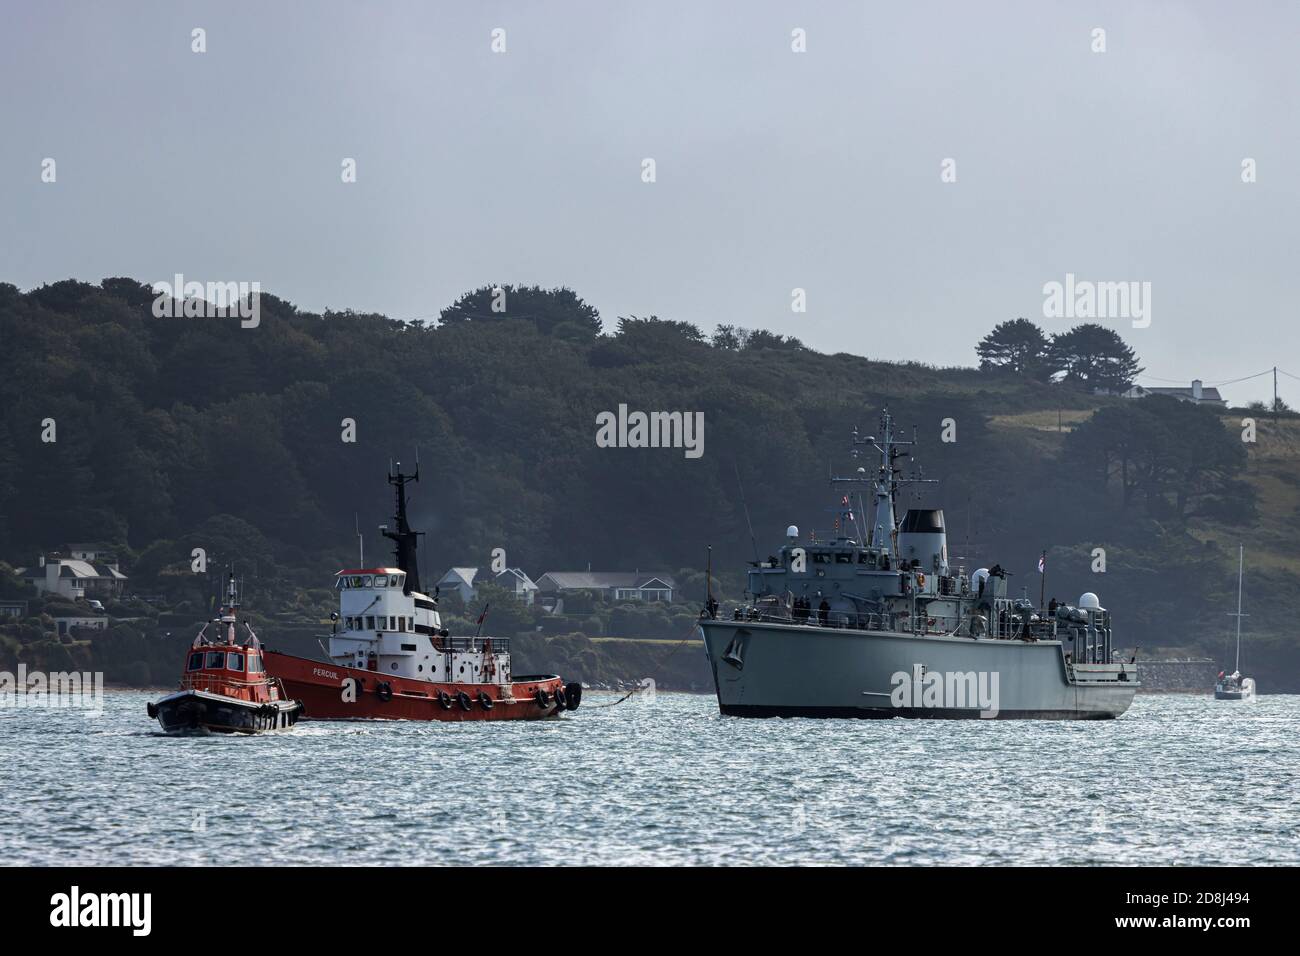 A pilot leading a tug pulling a navy boat Stock Photo